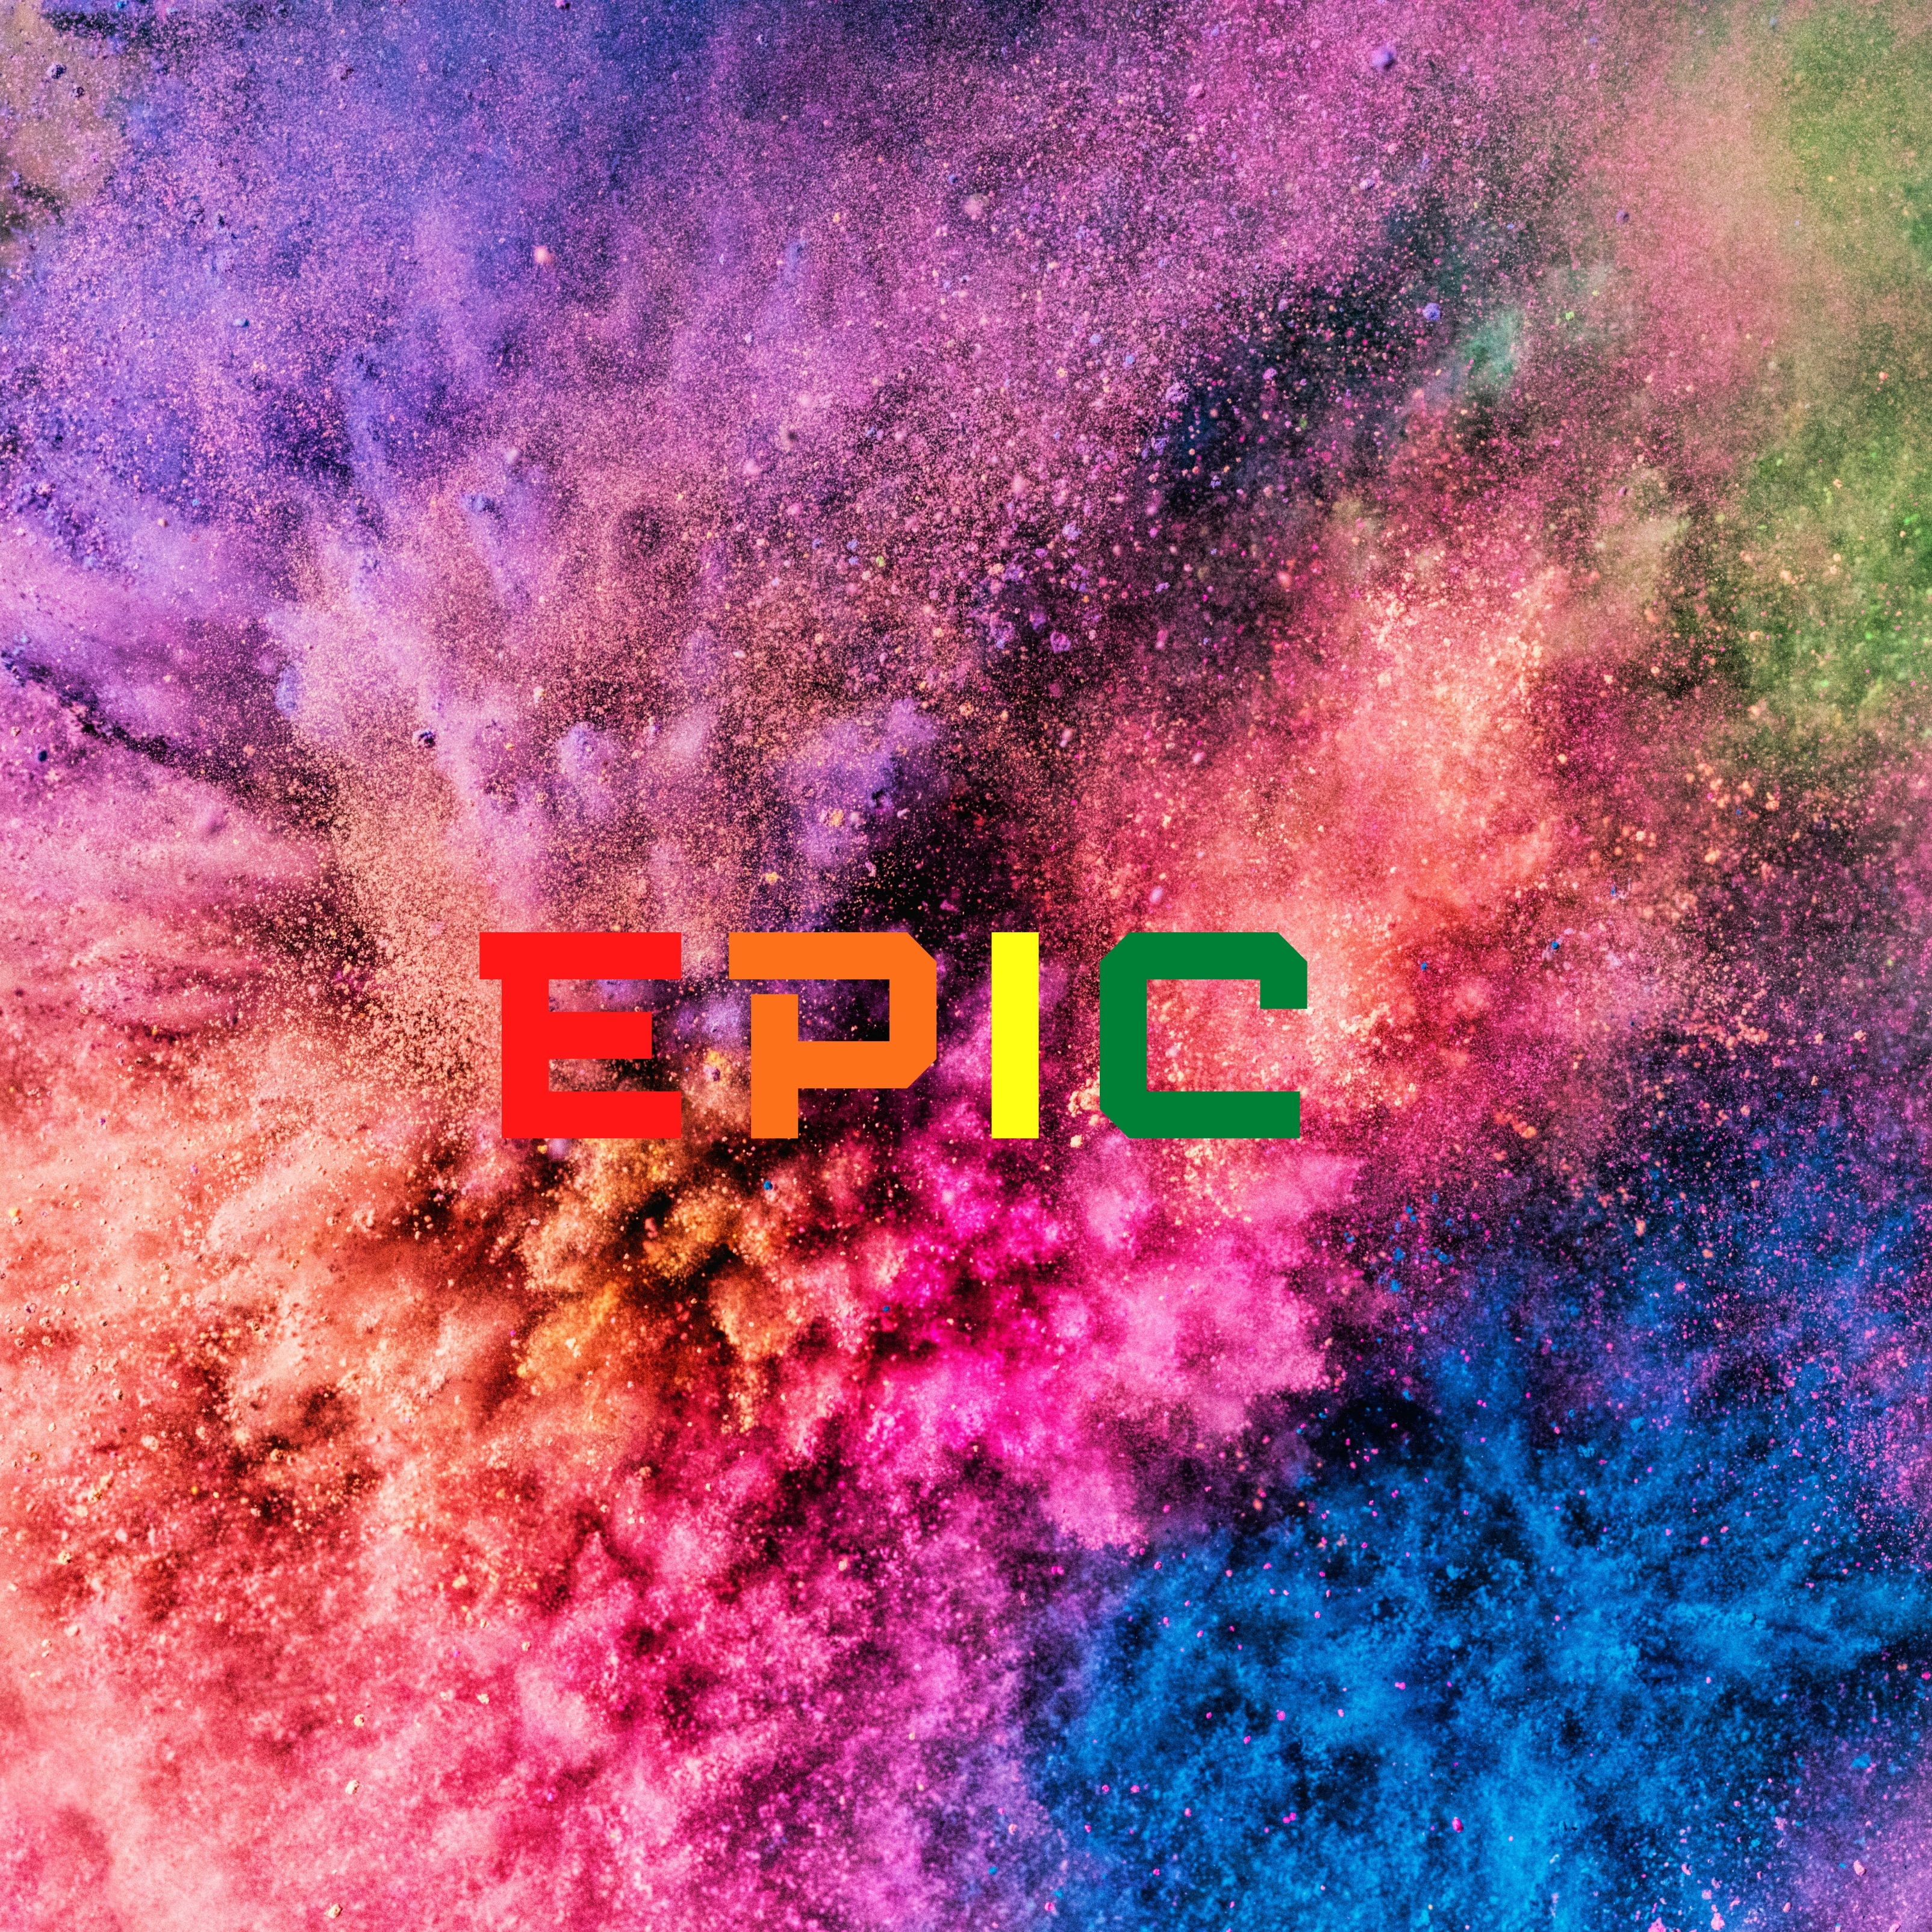 iPad Wallpapers Epic Holi Powder Colorful Background iPad Wallpaper 3208x3208 px